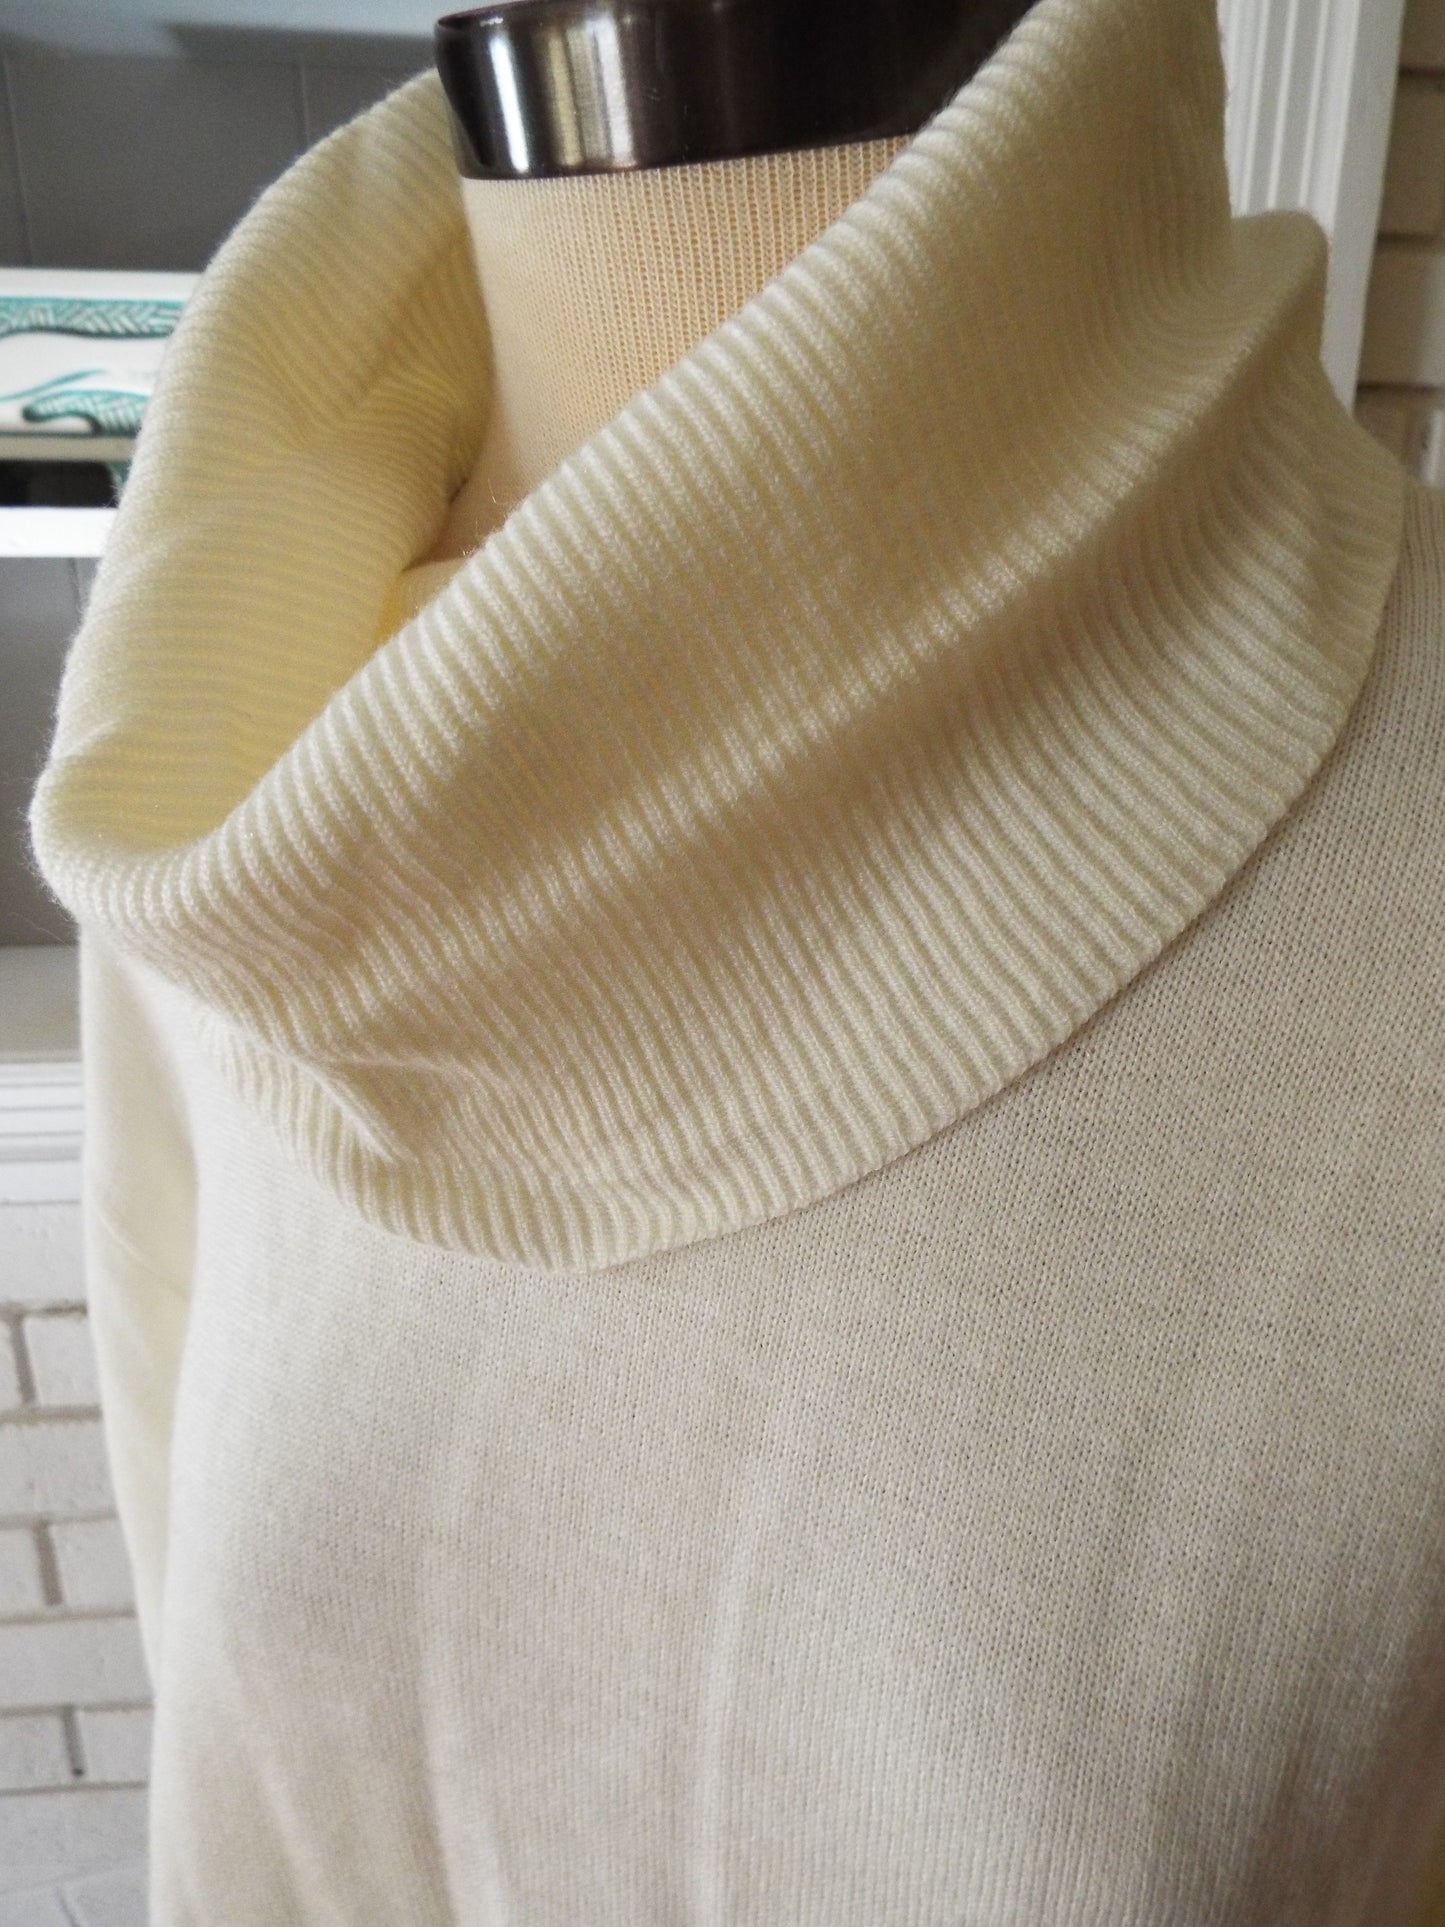 Vintage Off White Turtle Neck Sweater by Gotham. NEVER WORN!!